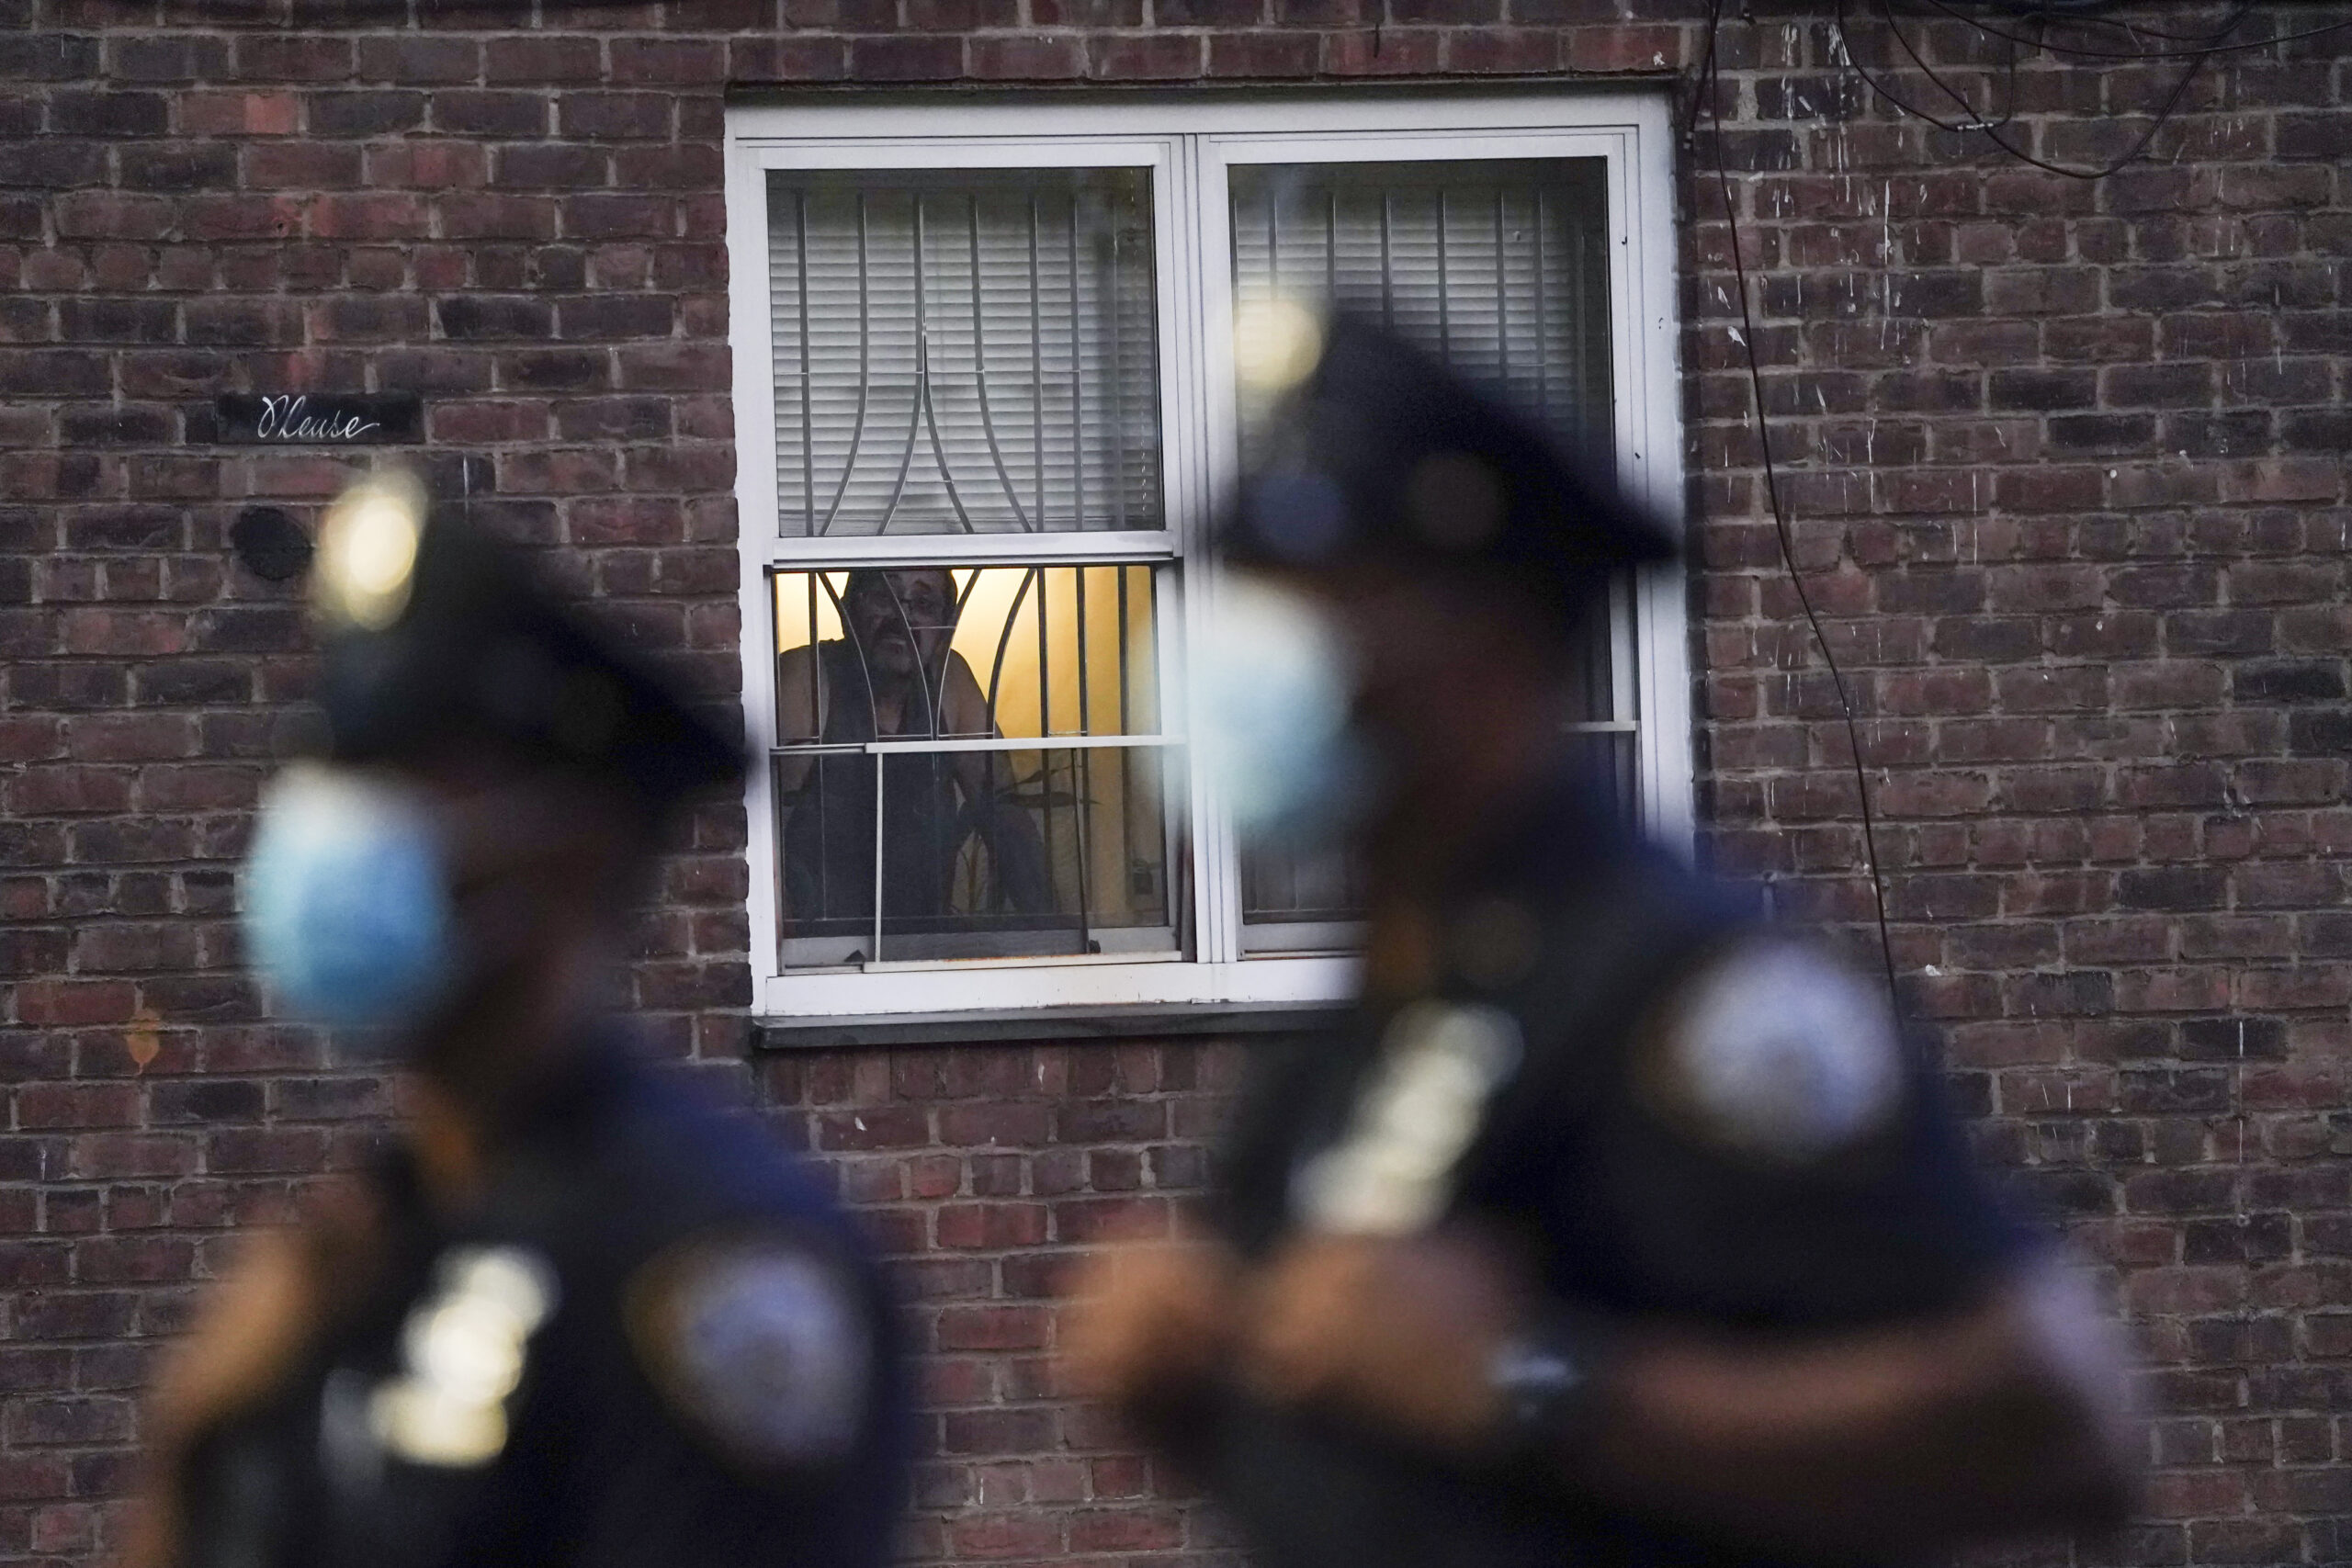 FILE - In this Aug. 18, 2020, file photo, a neighbor watches New York City Police Department officers work a crime scene where several young men were shot and wounded at the Ravenswood Houses in the Queens borough of New York. Heralded as the safest big city in America in recent years, New York City is closing out its bloodiest year in nearly a decade, grappling with a surge in homicides and a pandemic authorities say has helped fuel violence. (AP Photo/John Minchillo, File)